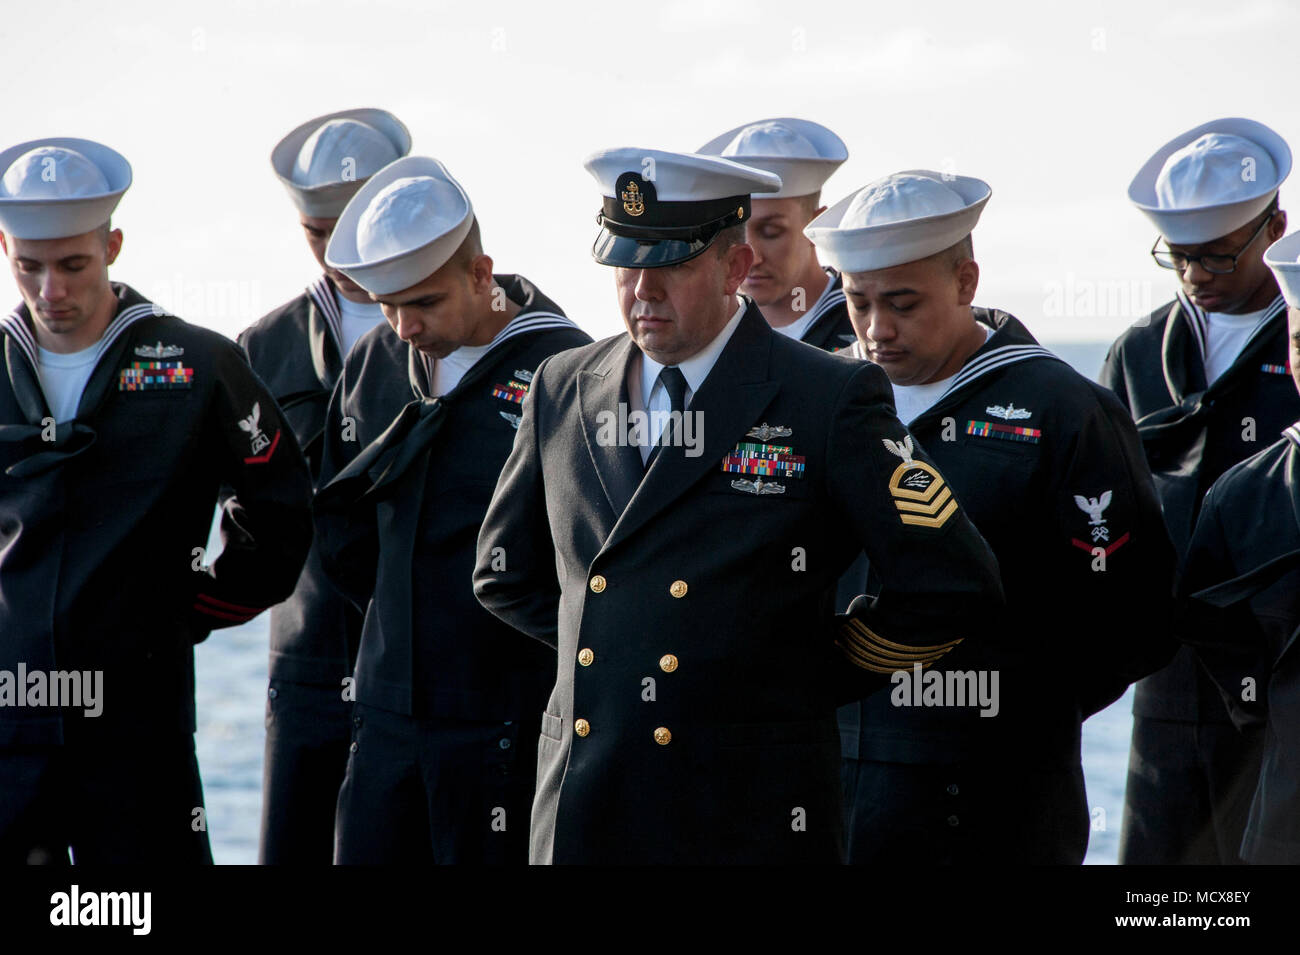 180304-N-HT134-022 PACIFIC OCEAN (March 4, 2018) Sailors aboard the amphibious assault ship USS America (LHA 6) bow their heads for the chaplain’s benediction during a burial-at-sea ceremony on the ship’s starboard elevator. America is underway off the coast of southern California preparing for an ammunitions offload prior to entering a planned maintenance availability period. (U.S. Navy photo by Mass Communication Specialist Seaman Daniel Pastor/Released) Stock Photo